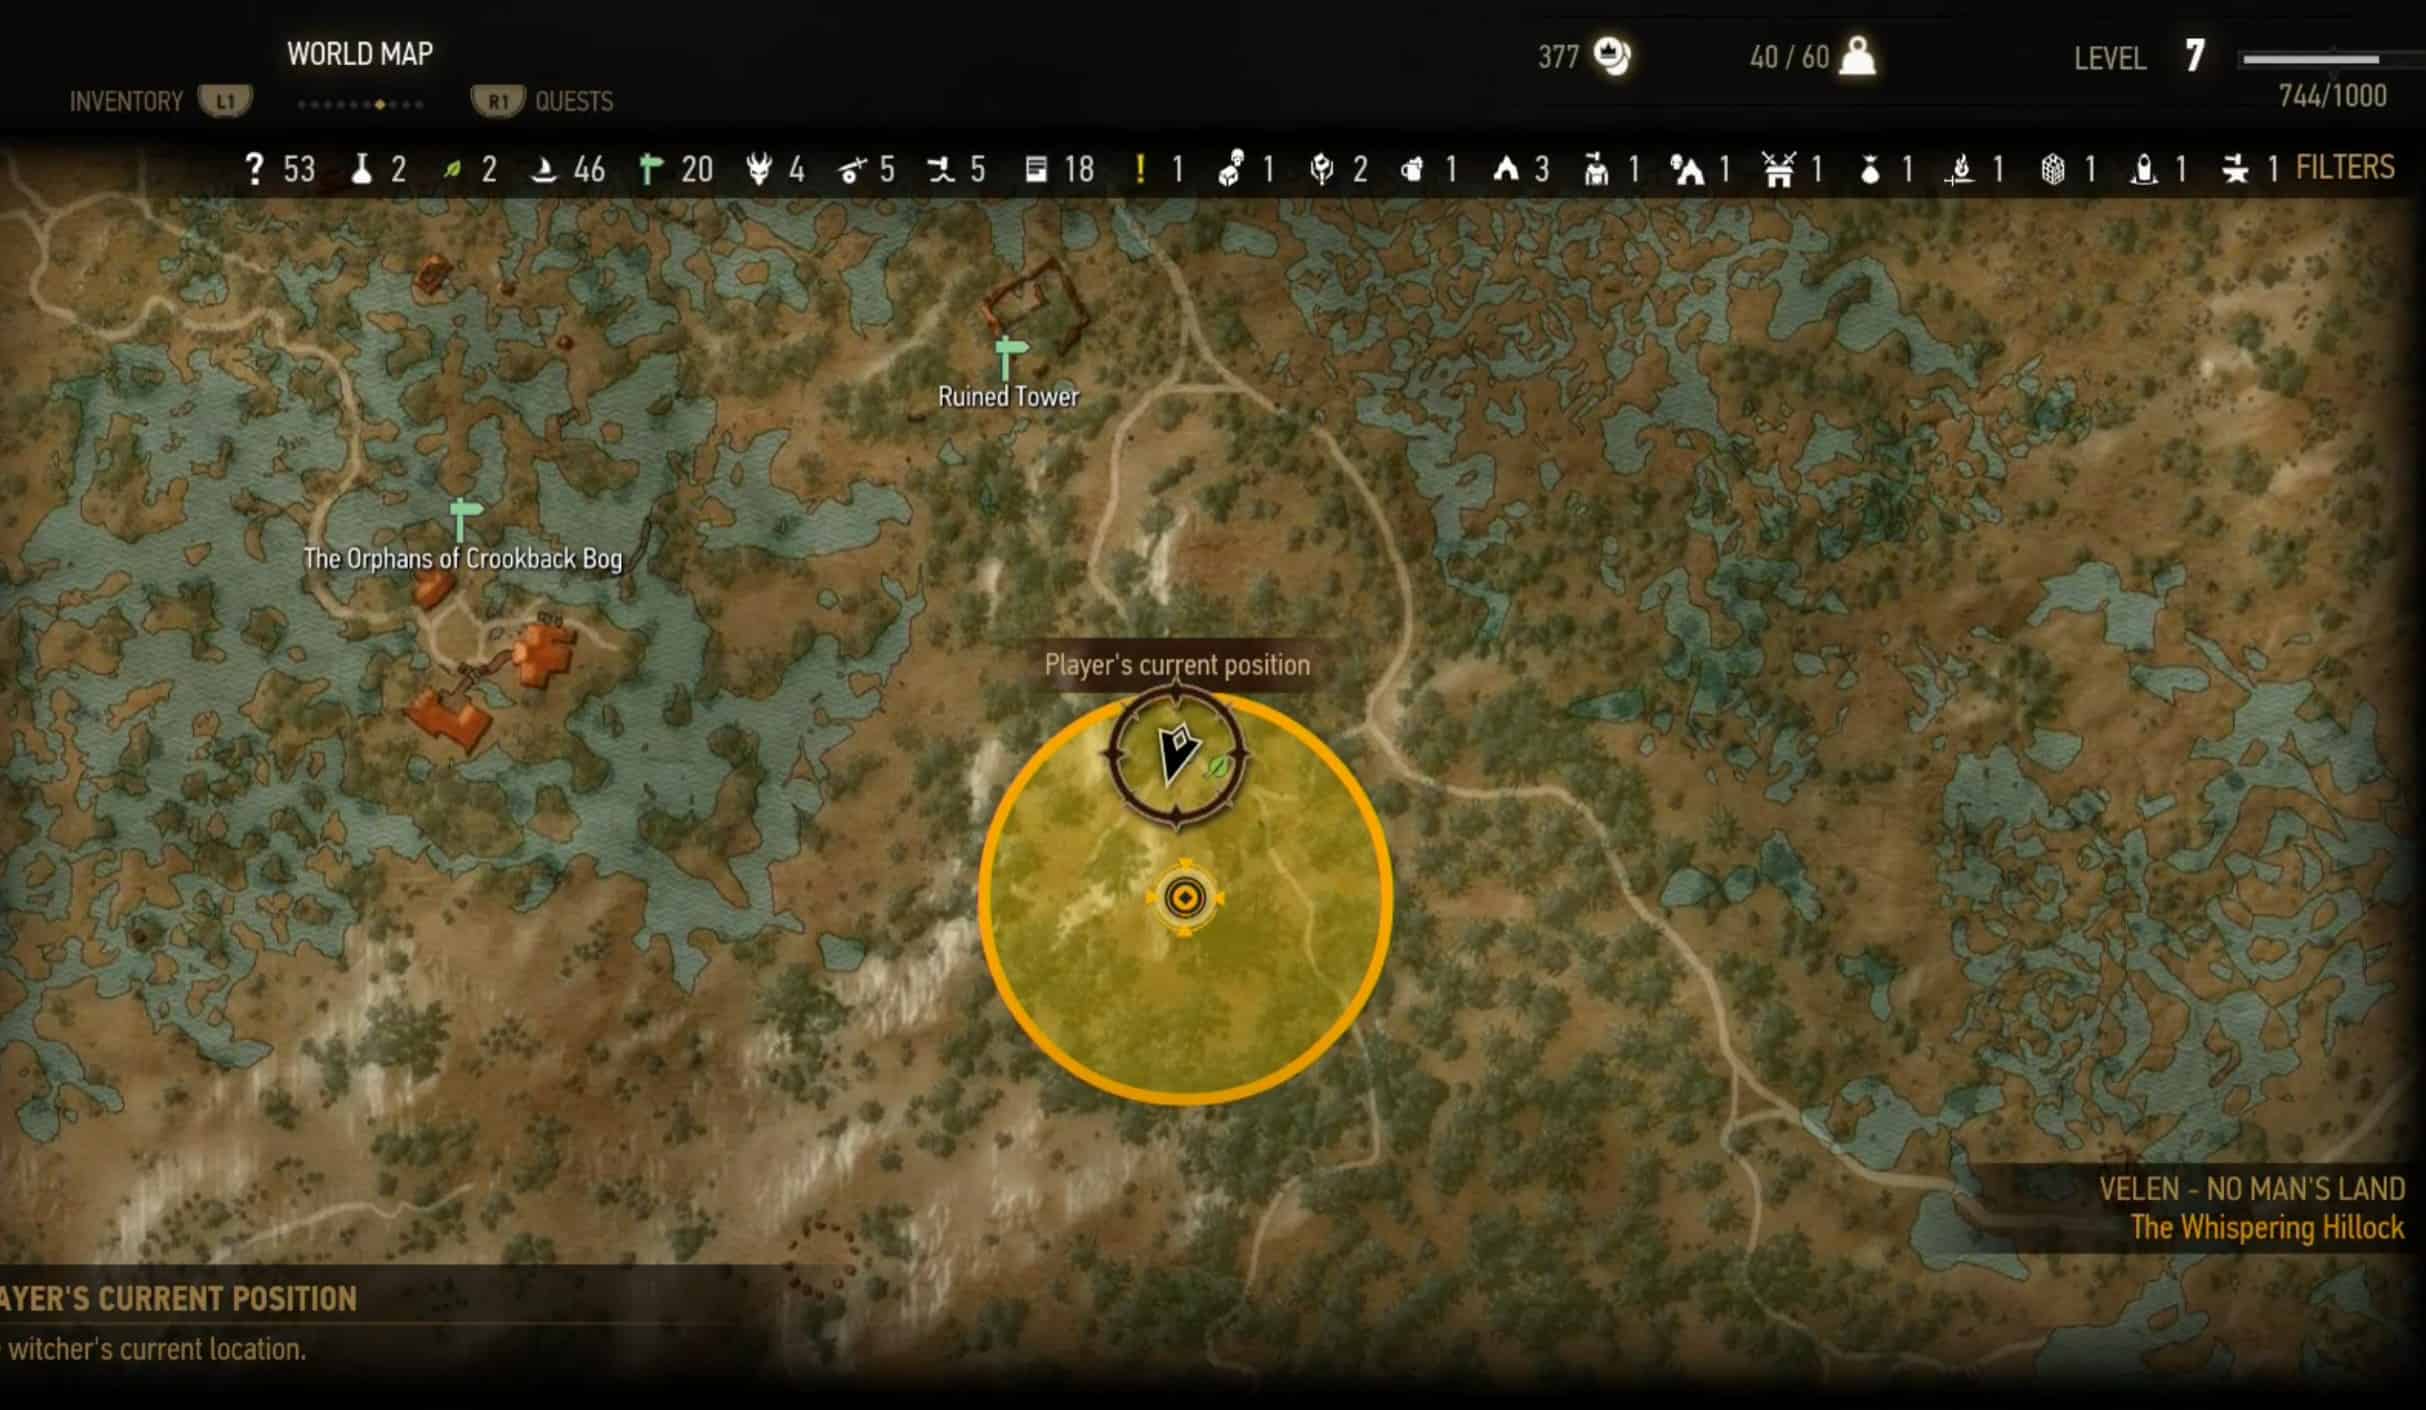 The Witcher 3 Whispering Hillock location